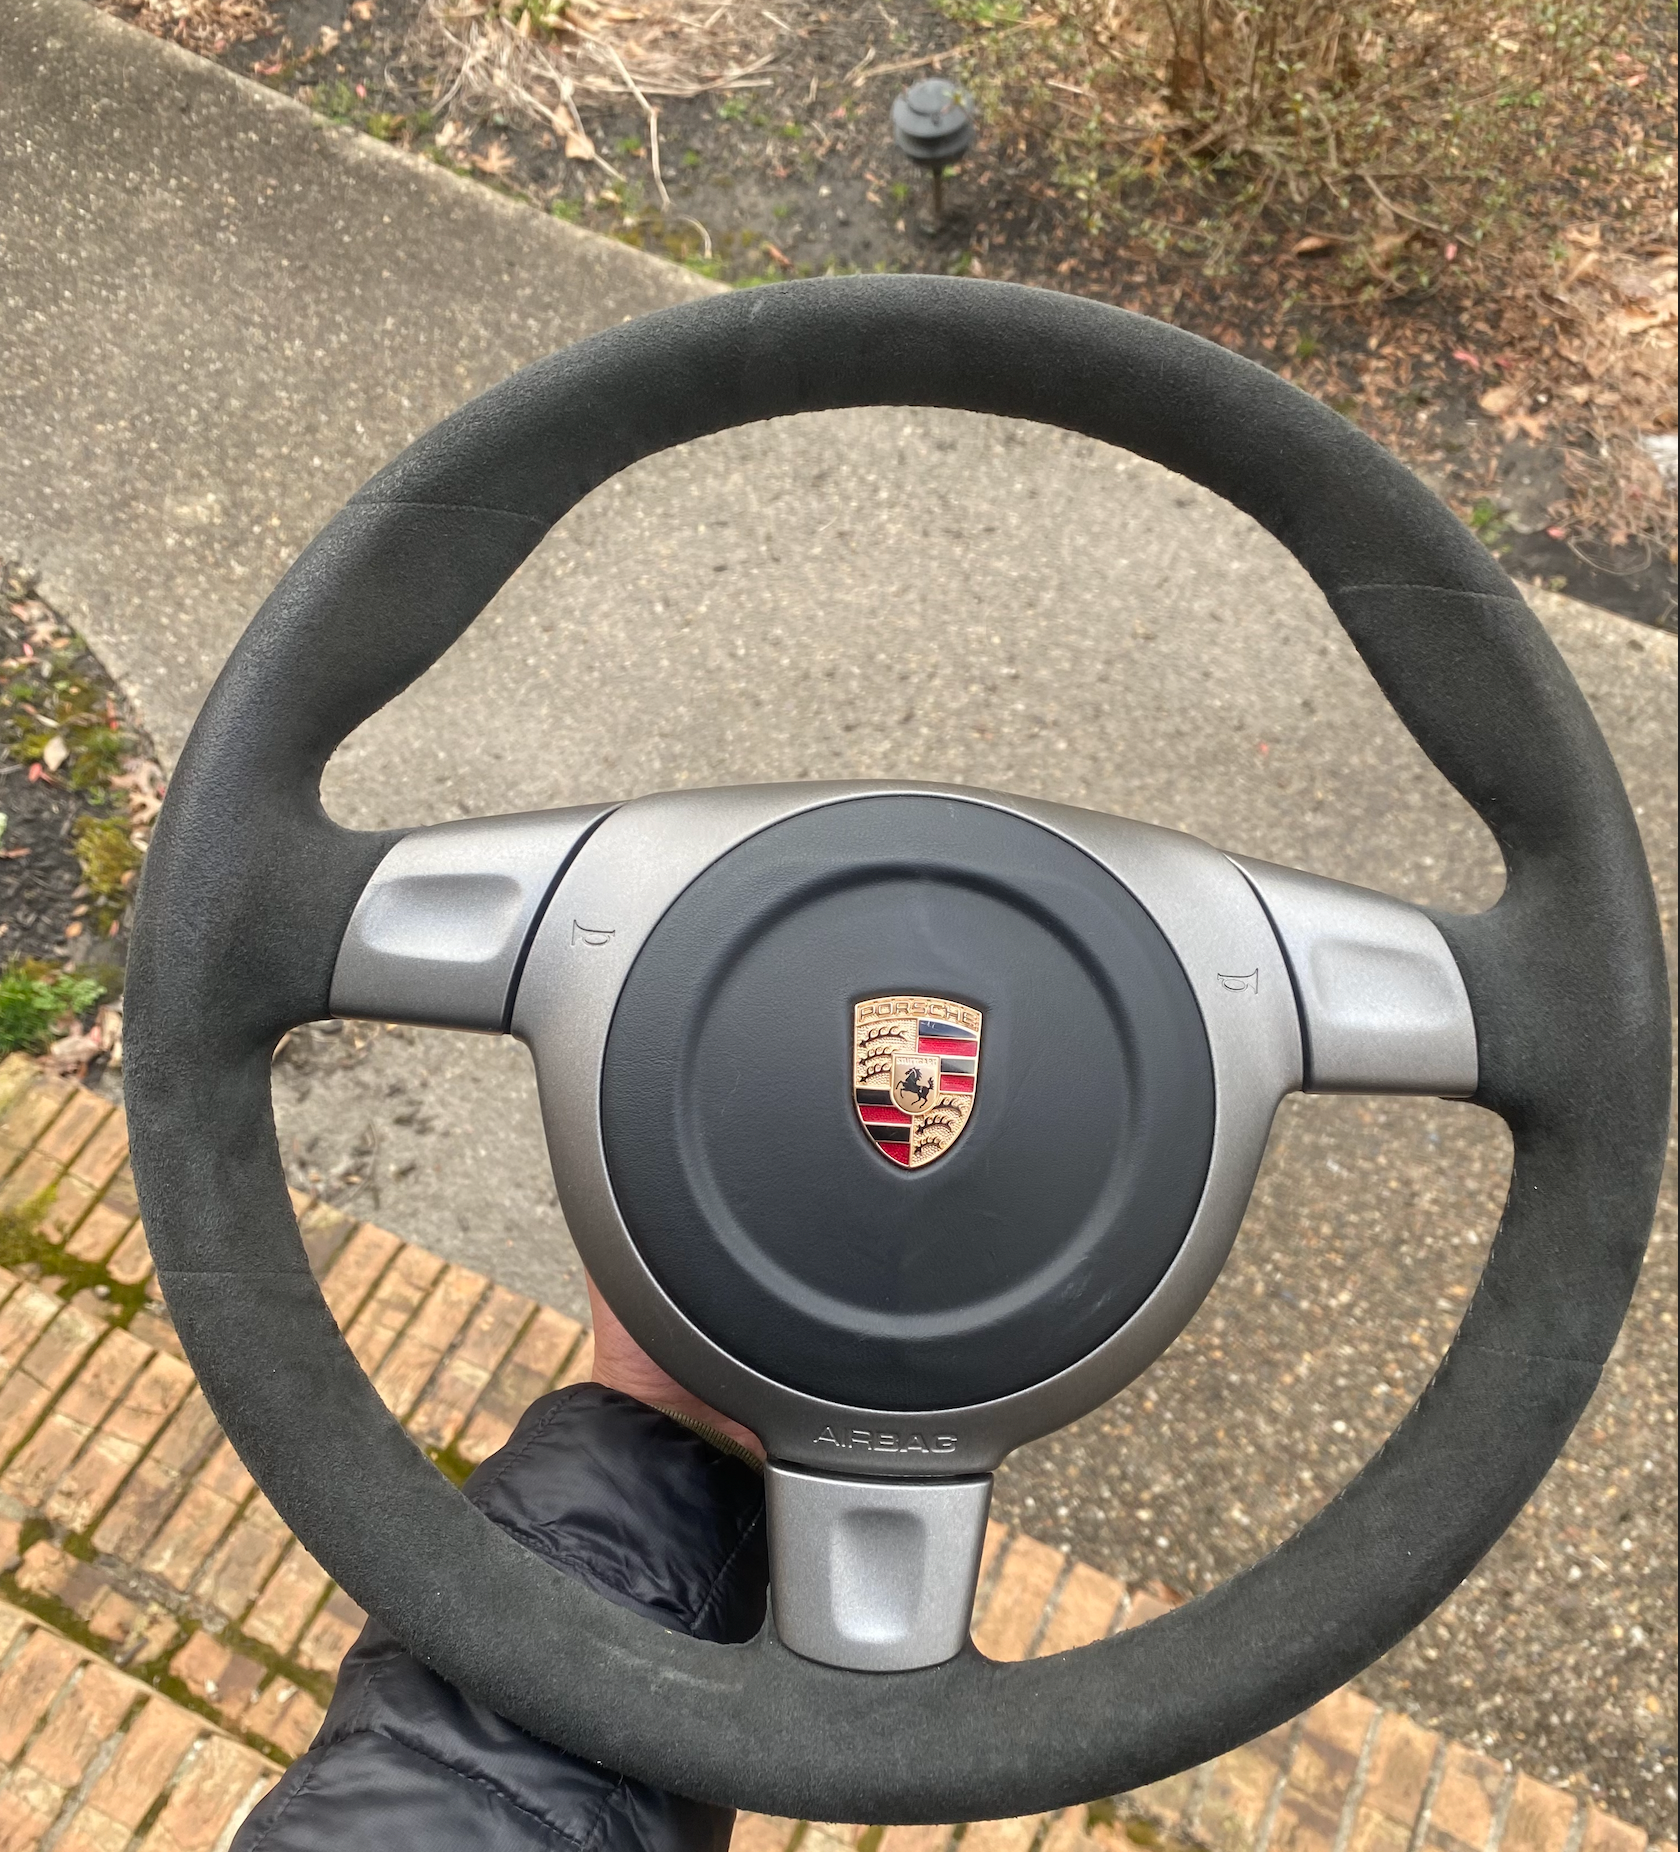 2007 Porsche GT3 - Factory 997 GT3 Steering Wheel with Airbag - Accessories - $1,750 - Princeton, NJ 08540, United States